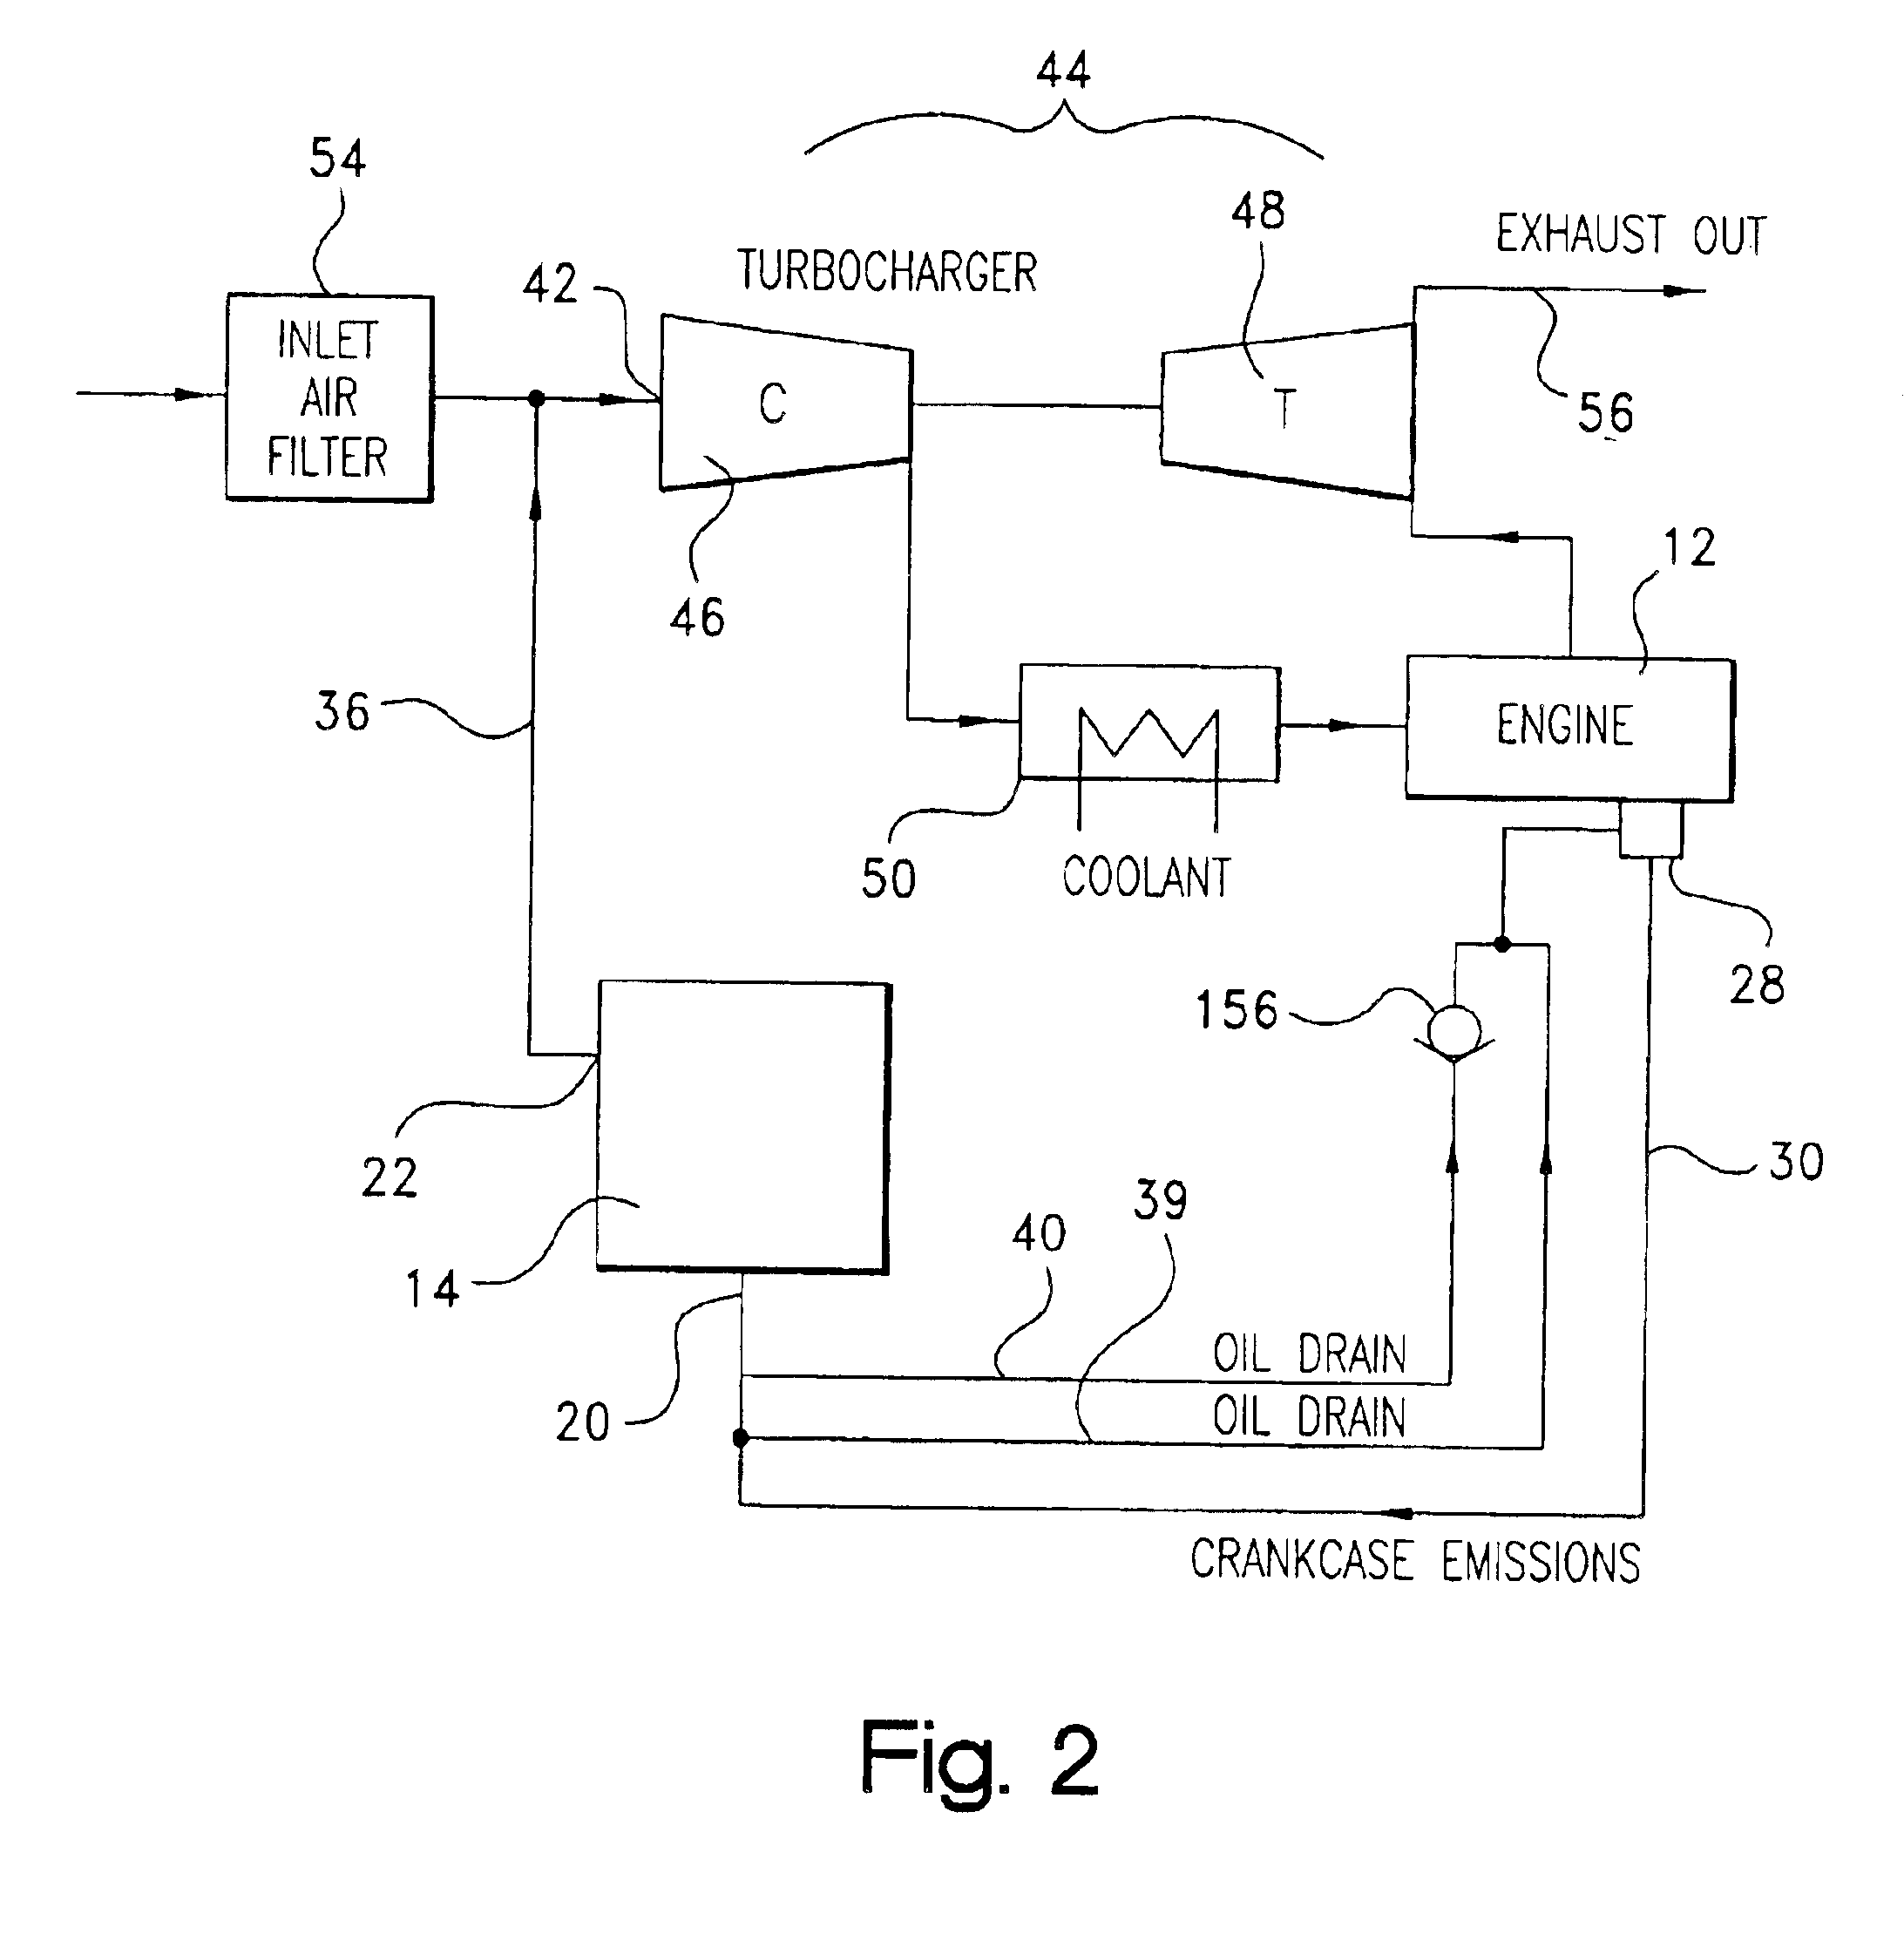 Filter element and assembly with continuous drain